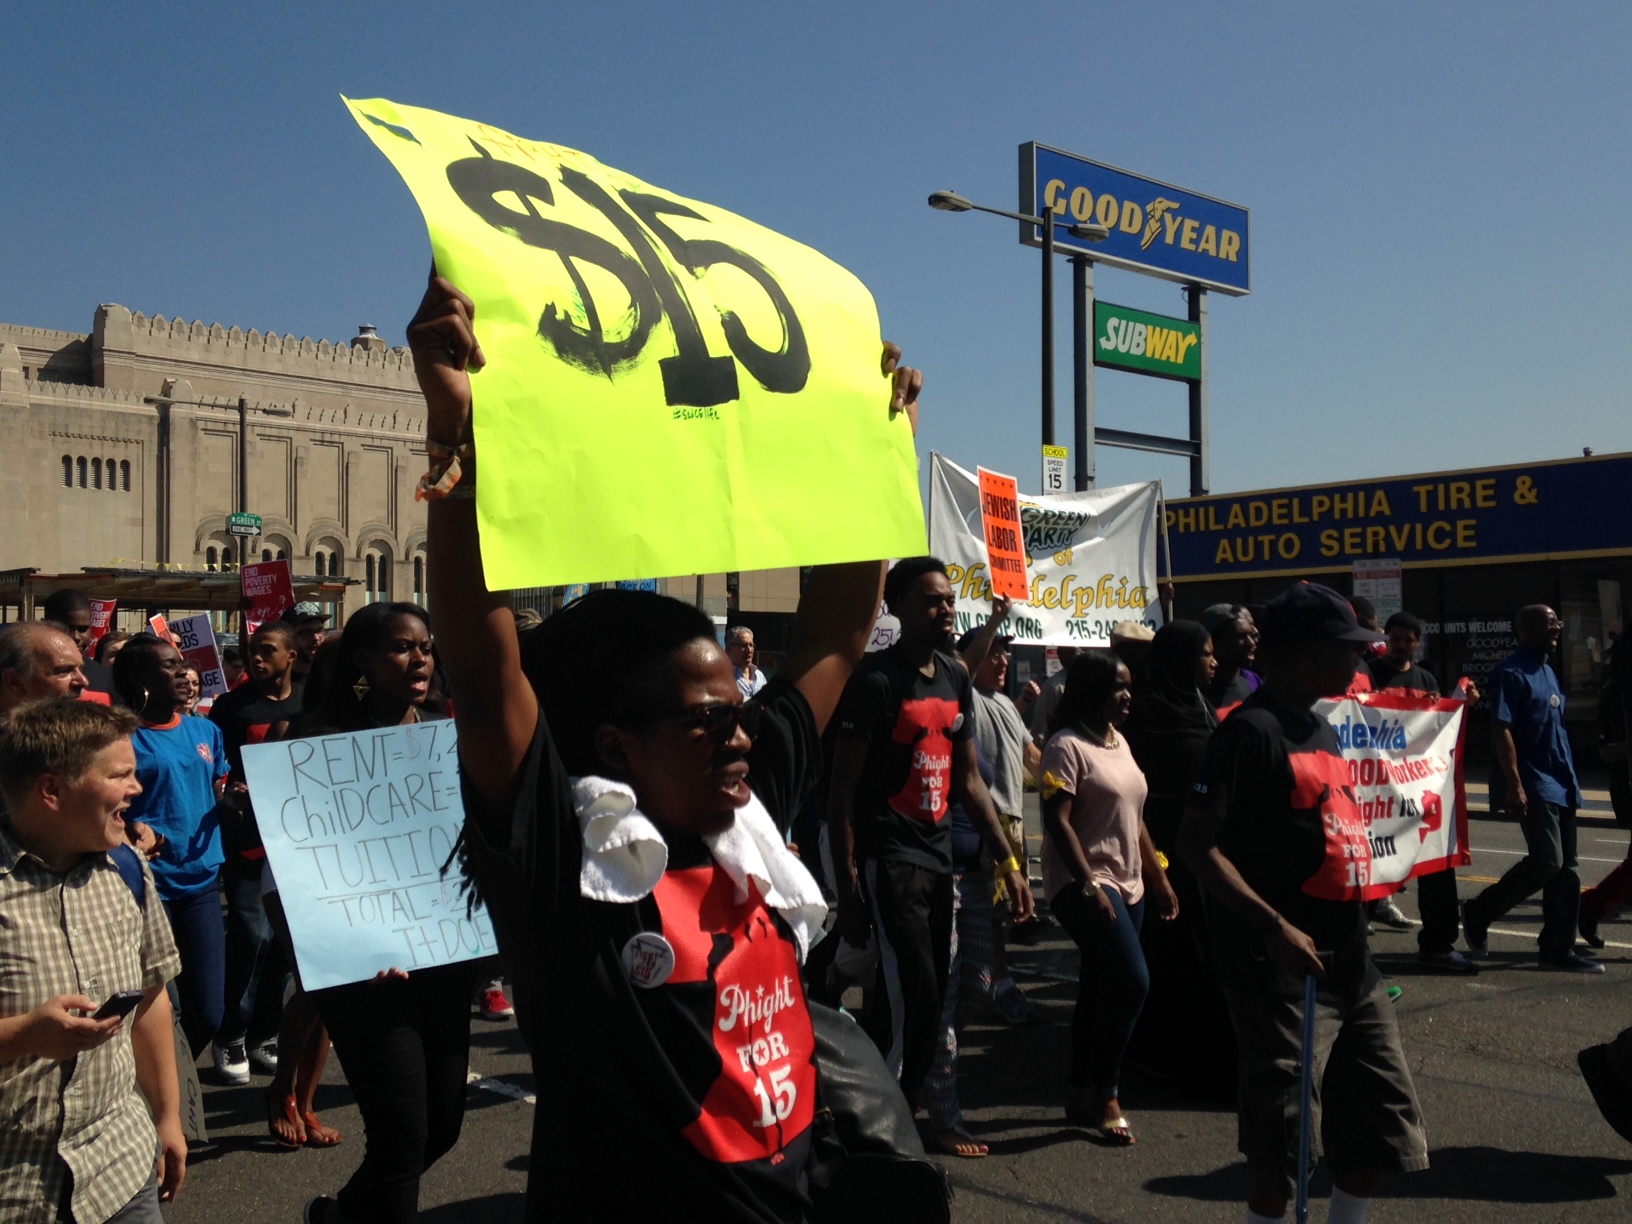 Coalition to Raise Minimum Wage, 15 Now, Expands Philly Chapter